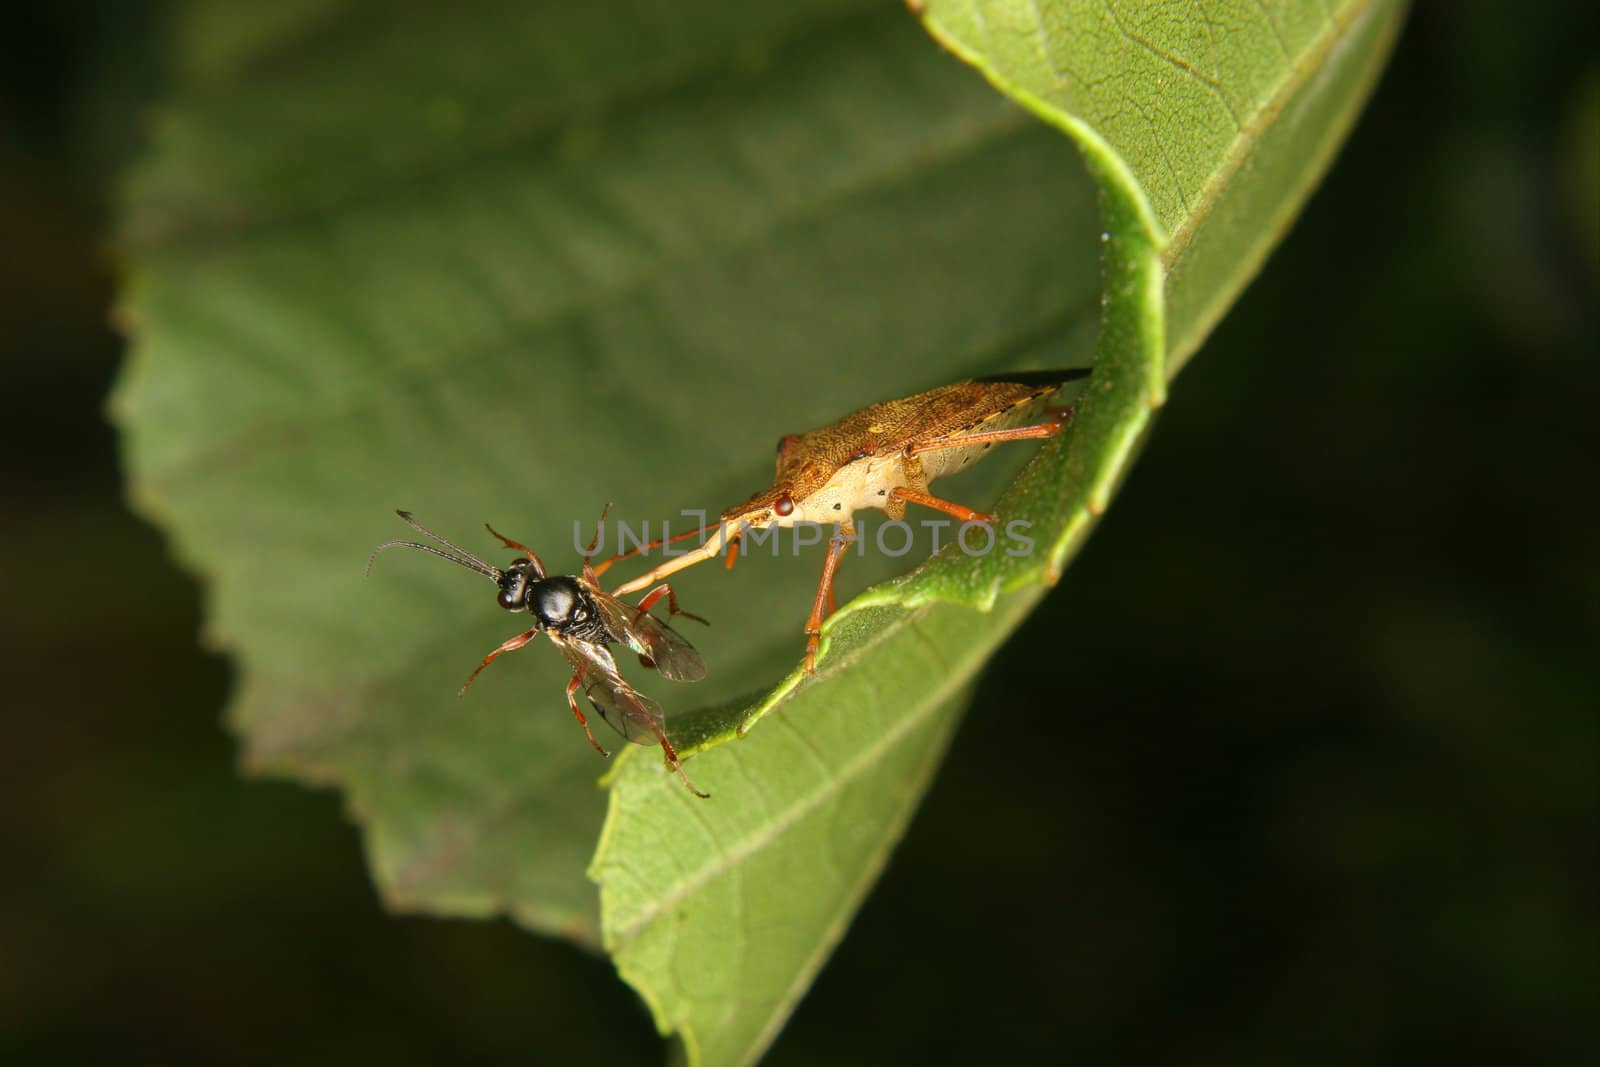 Assassin  bug (Reduviidae) with a captured fly